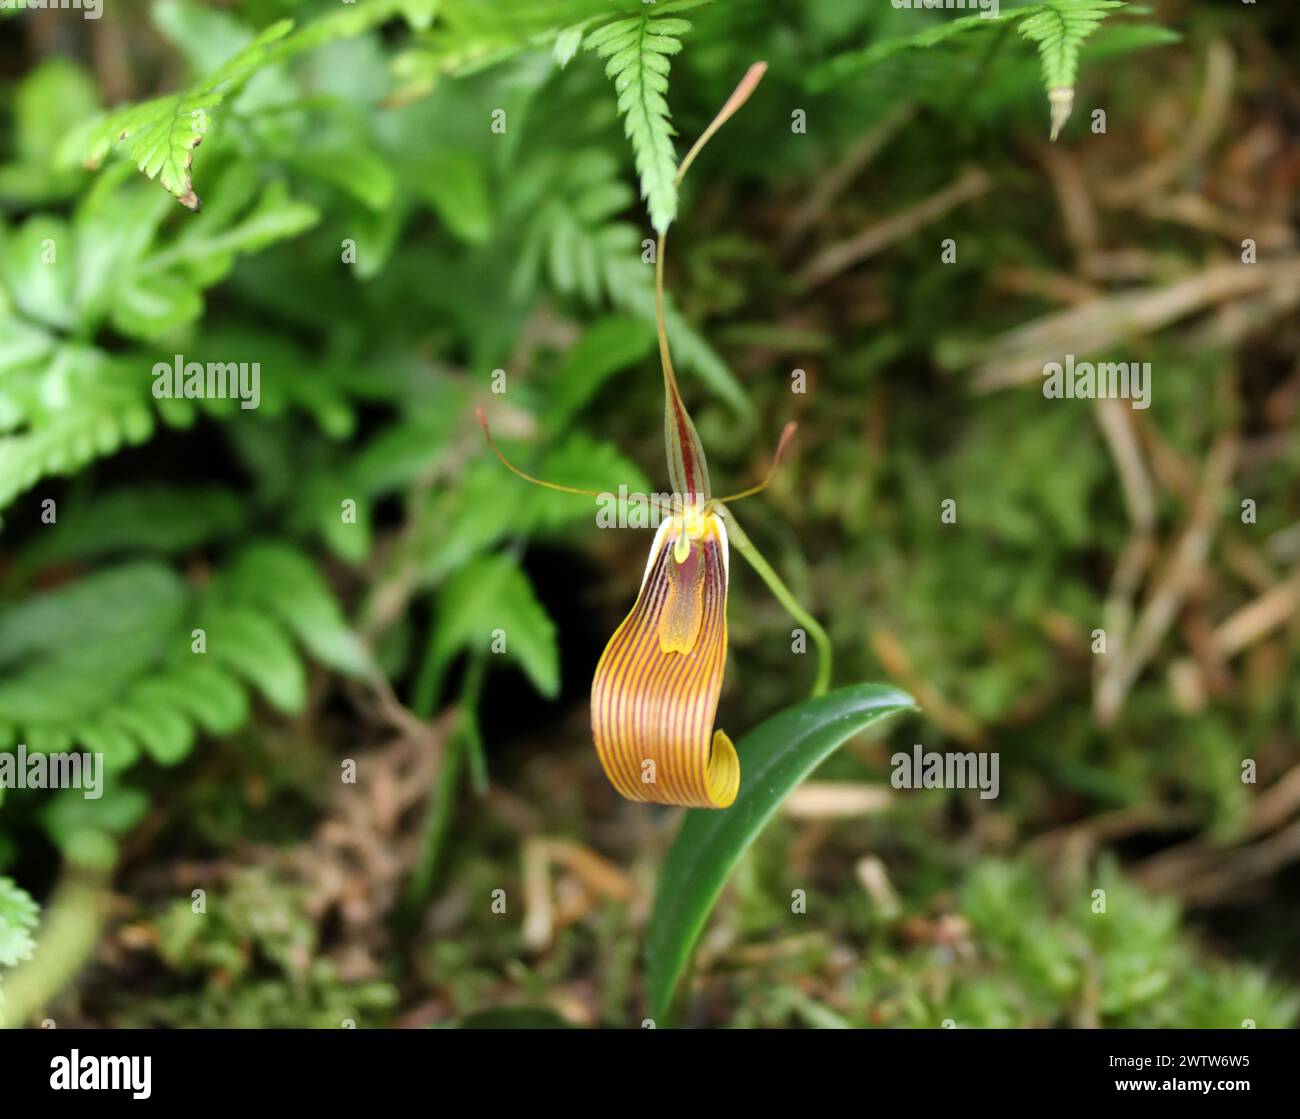 The Antennae-carrying Restrepia Orchid, Restrepia antennifera 'Giselle', Epidendroideae, Orchidaceae. Stock Photo